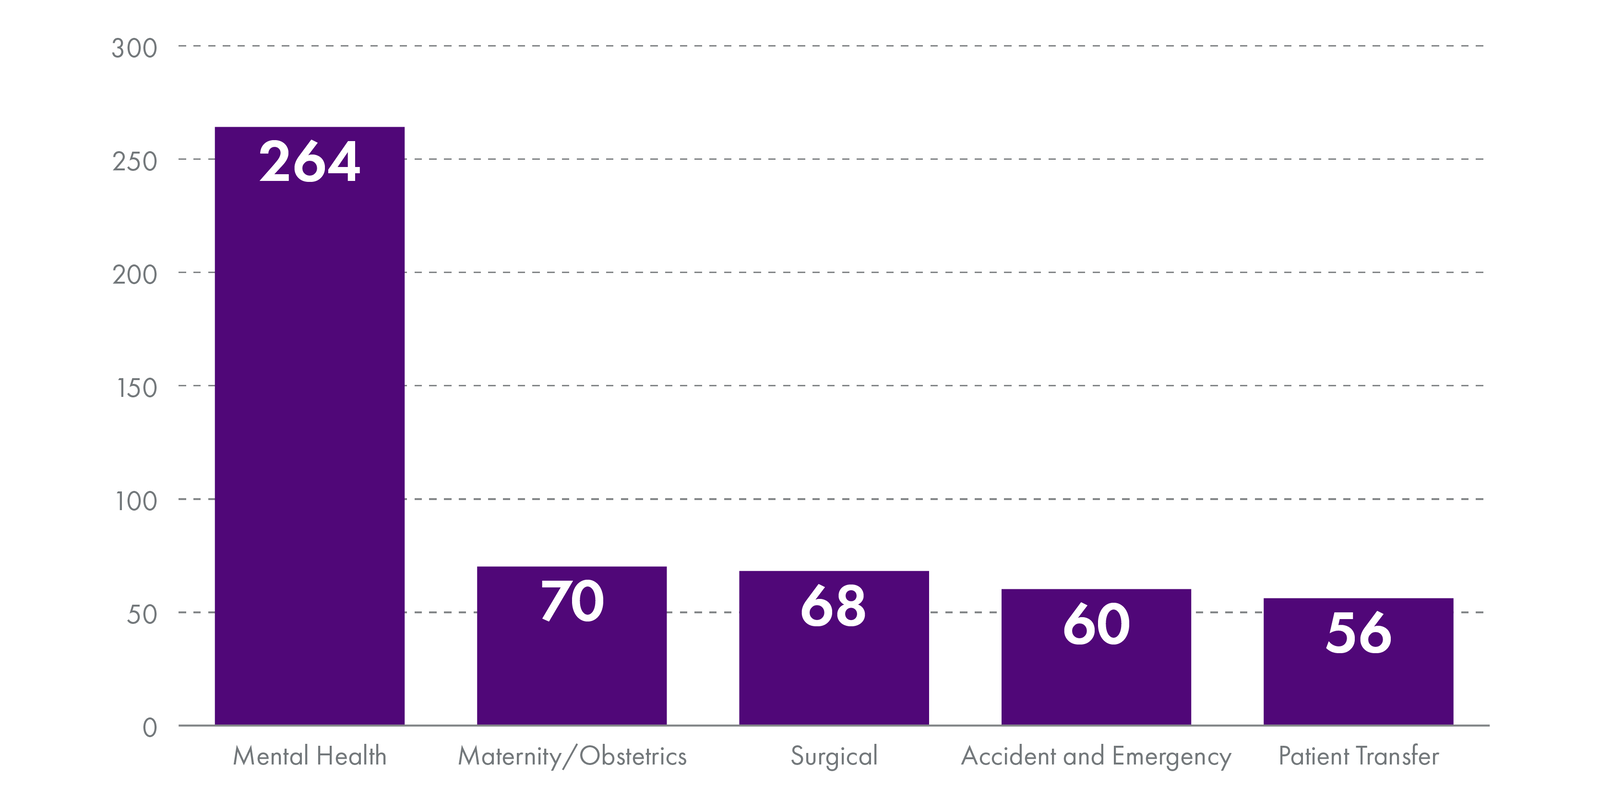 The bar graph shows the most frequent specialties or areas of healthcare in which significant adverse events occurred between January 2021 and October 2022. This shows that 264 took place in a mental health setting, 70 were in maternity/obstetrics, 68 in surgical, 60 in accident and emergency and 56 during patient transfer.